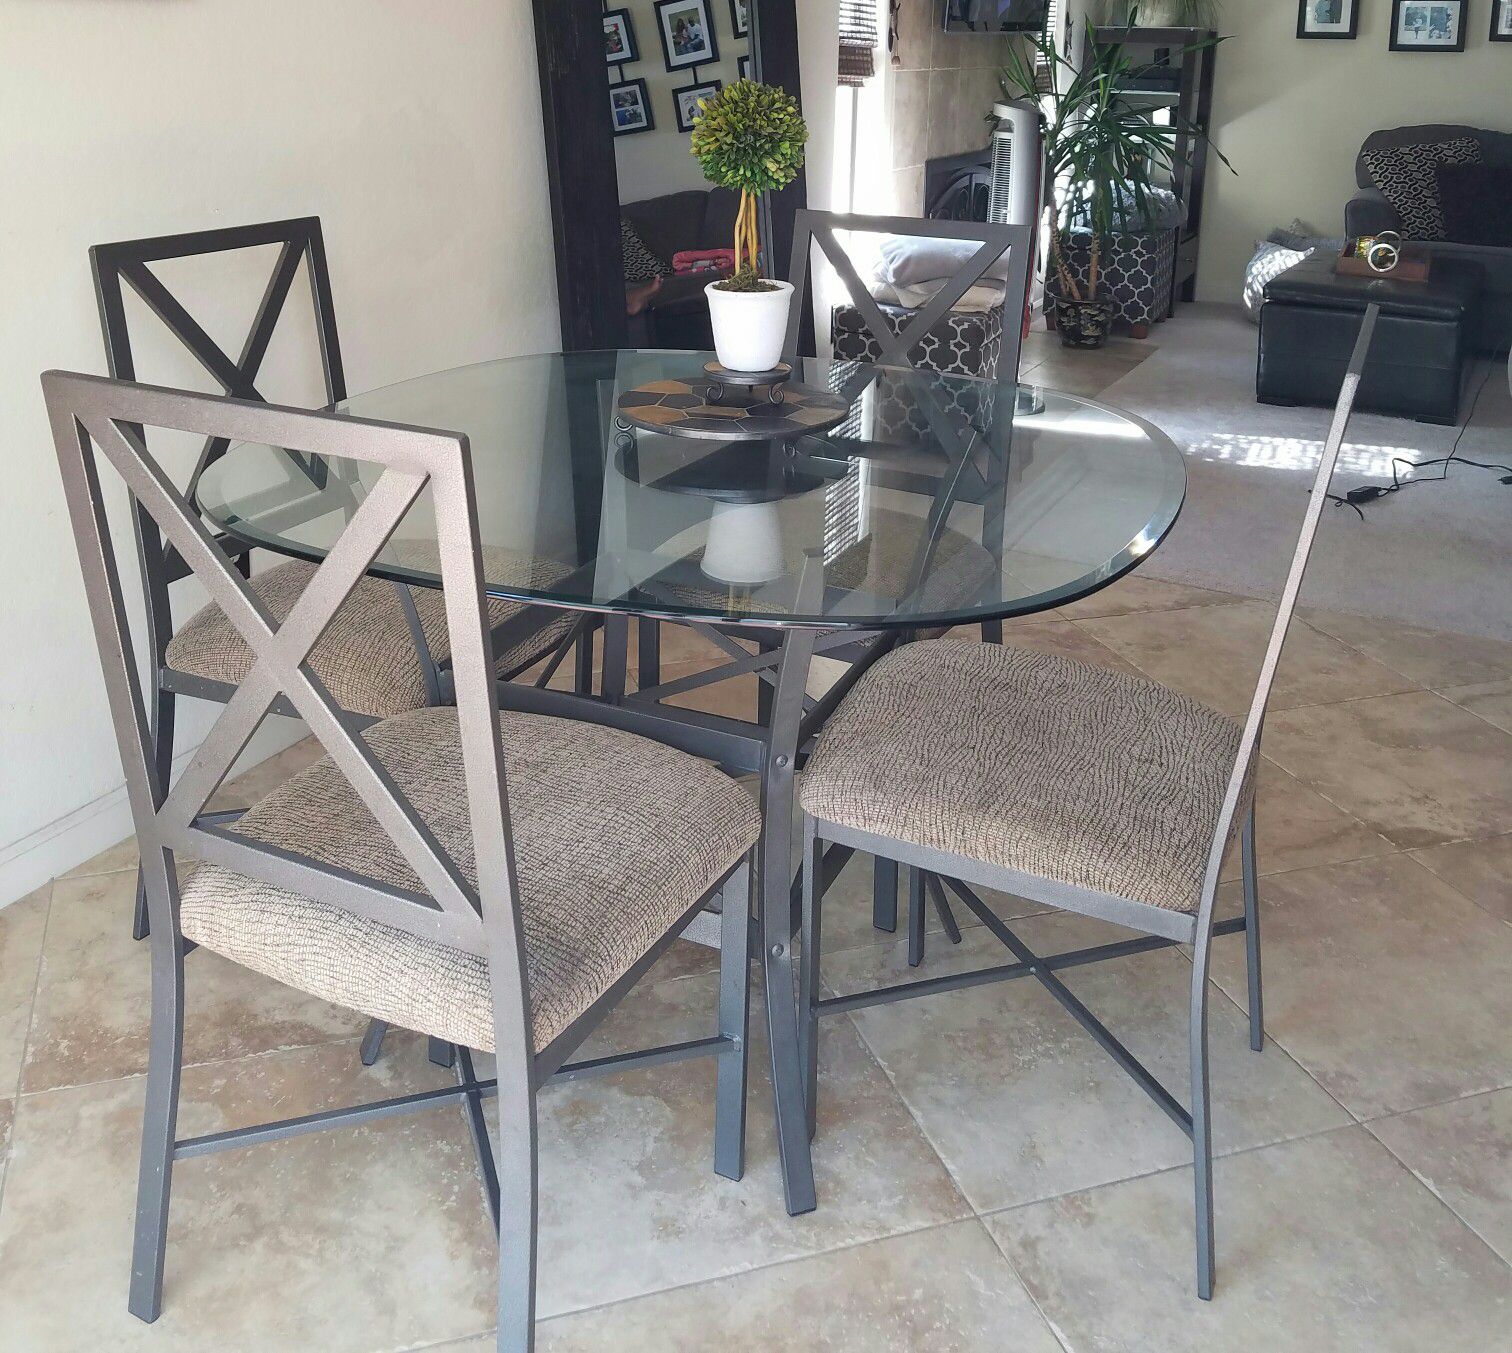 Dining set (Table and 4 chairs - Excellent condition!)